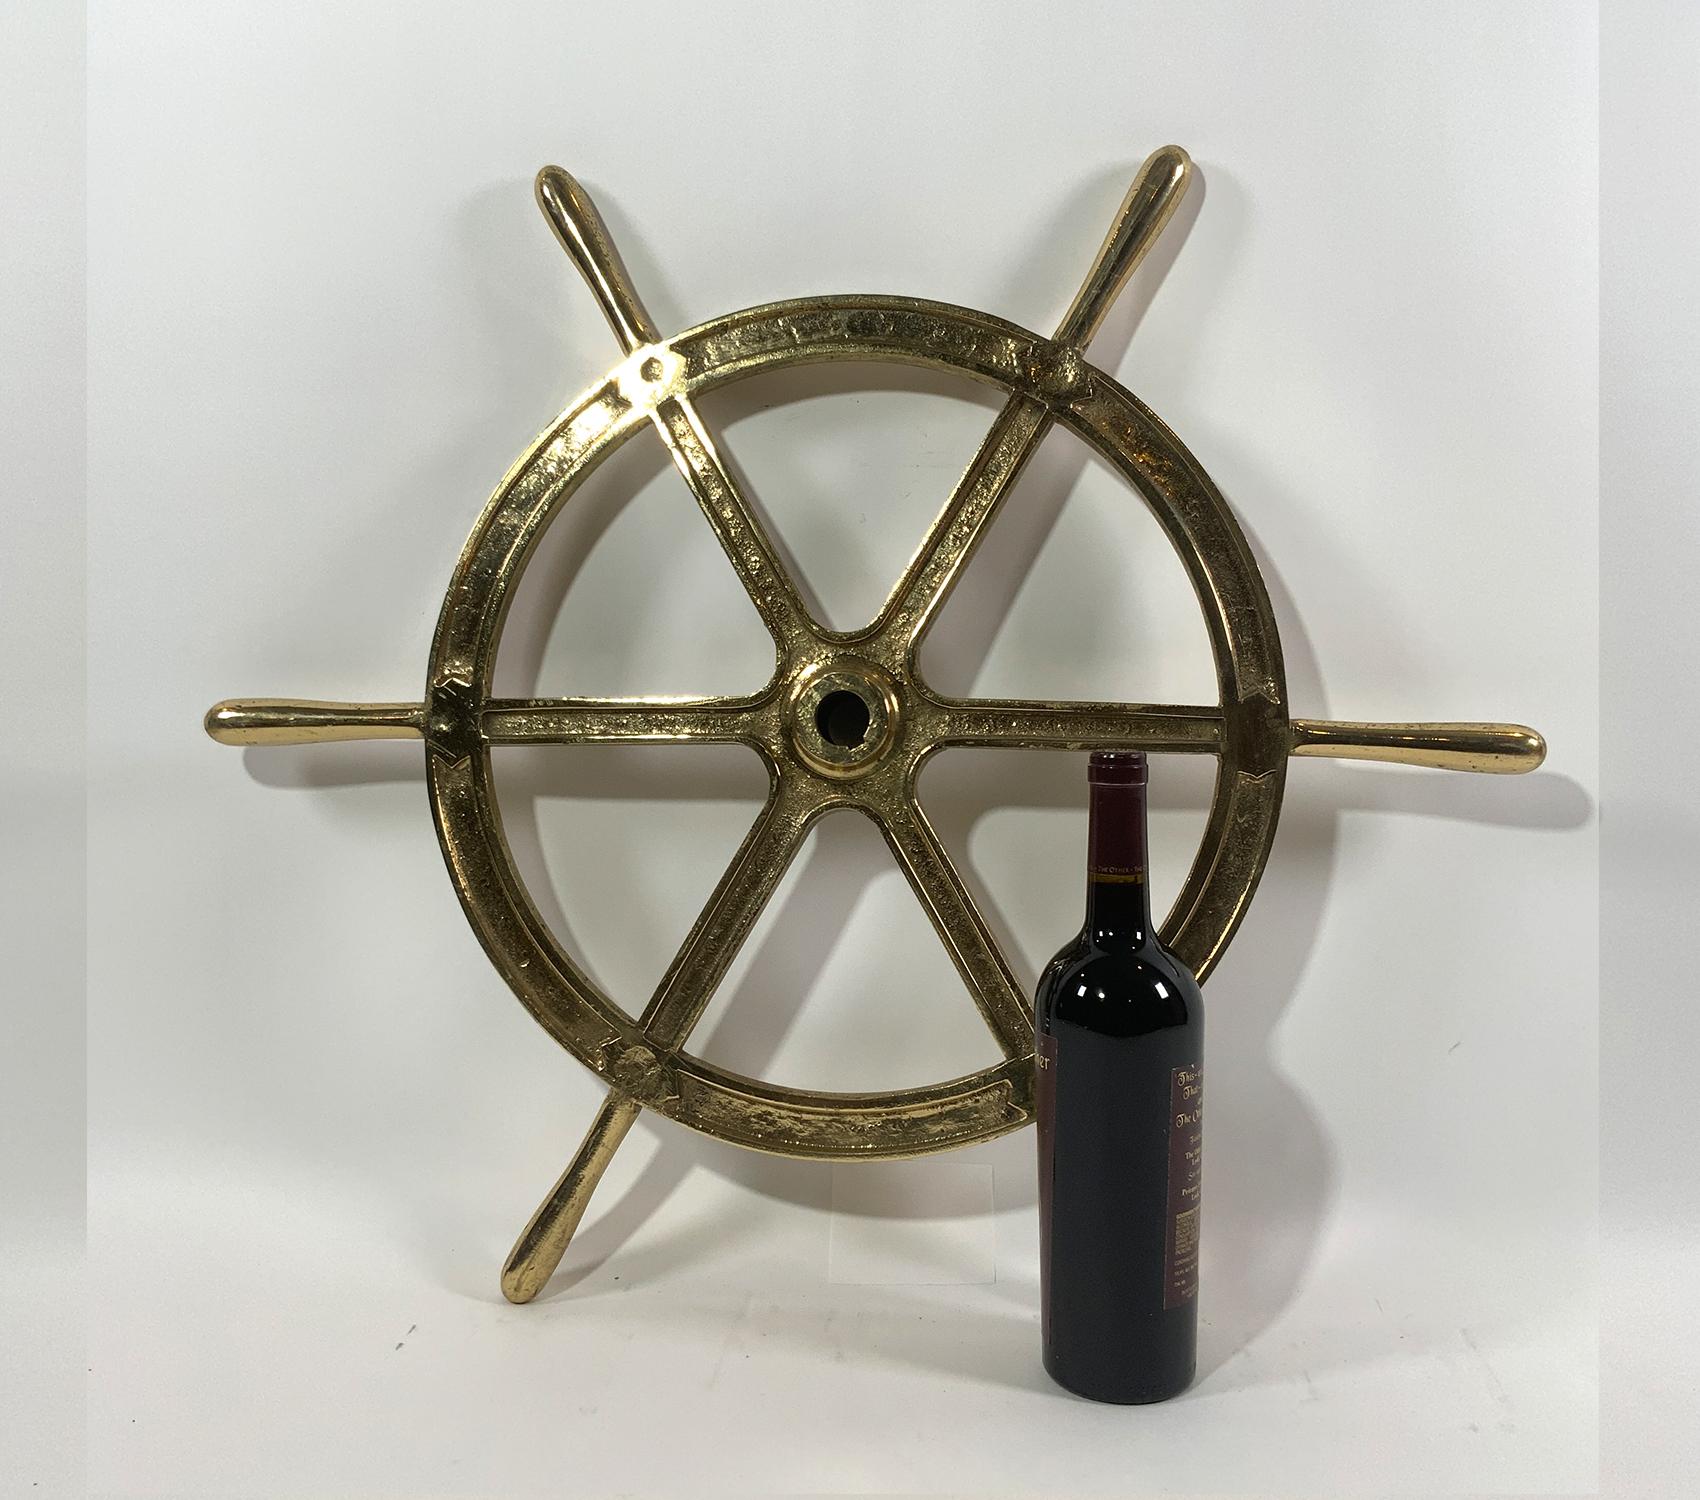 Six Spoke Solid Brass Ships Wheel In Good Condition For Sale In Norwell, MA